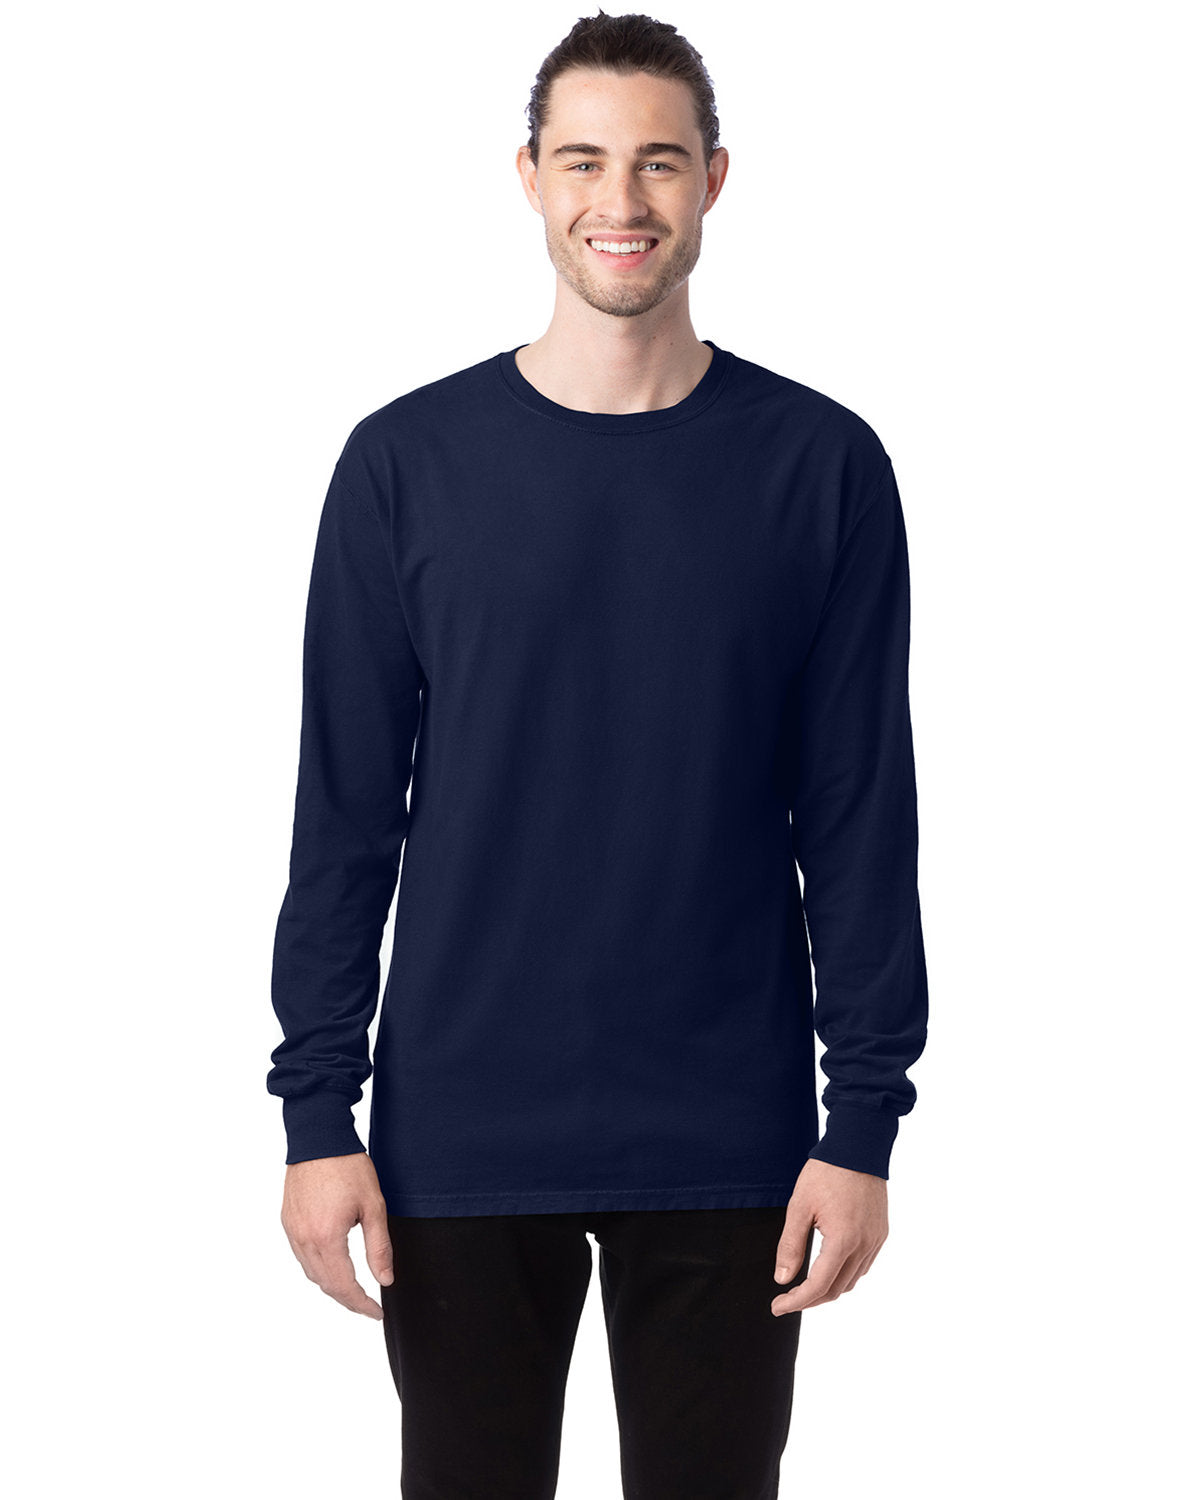 GDH200-CWH-54-NAVY-S